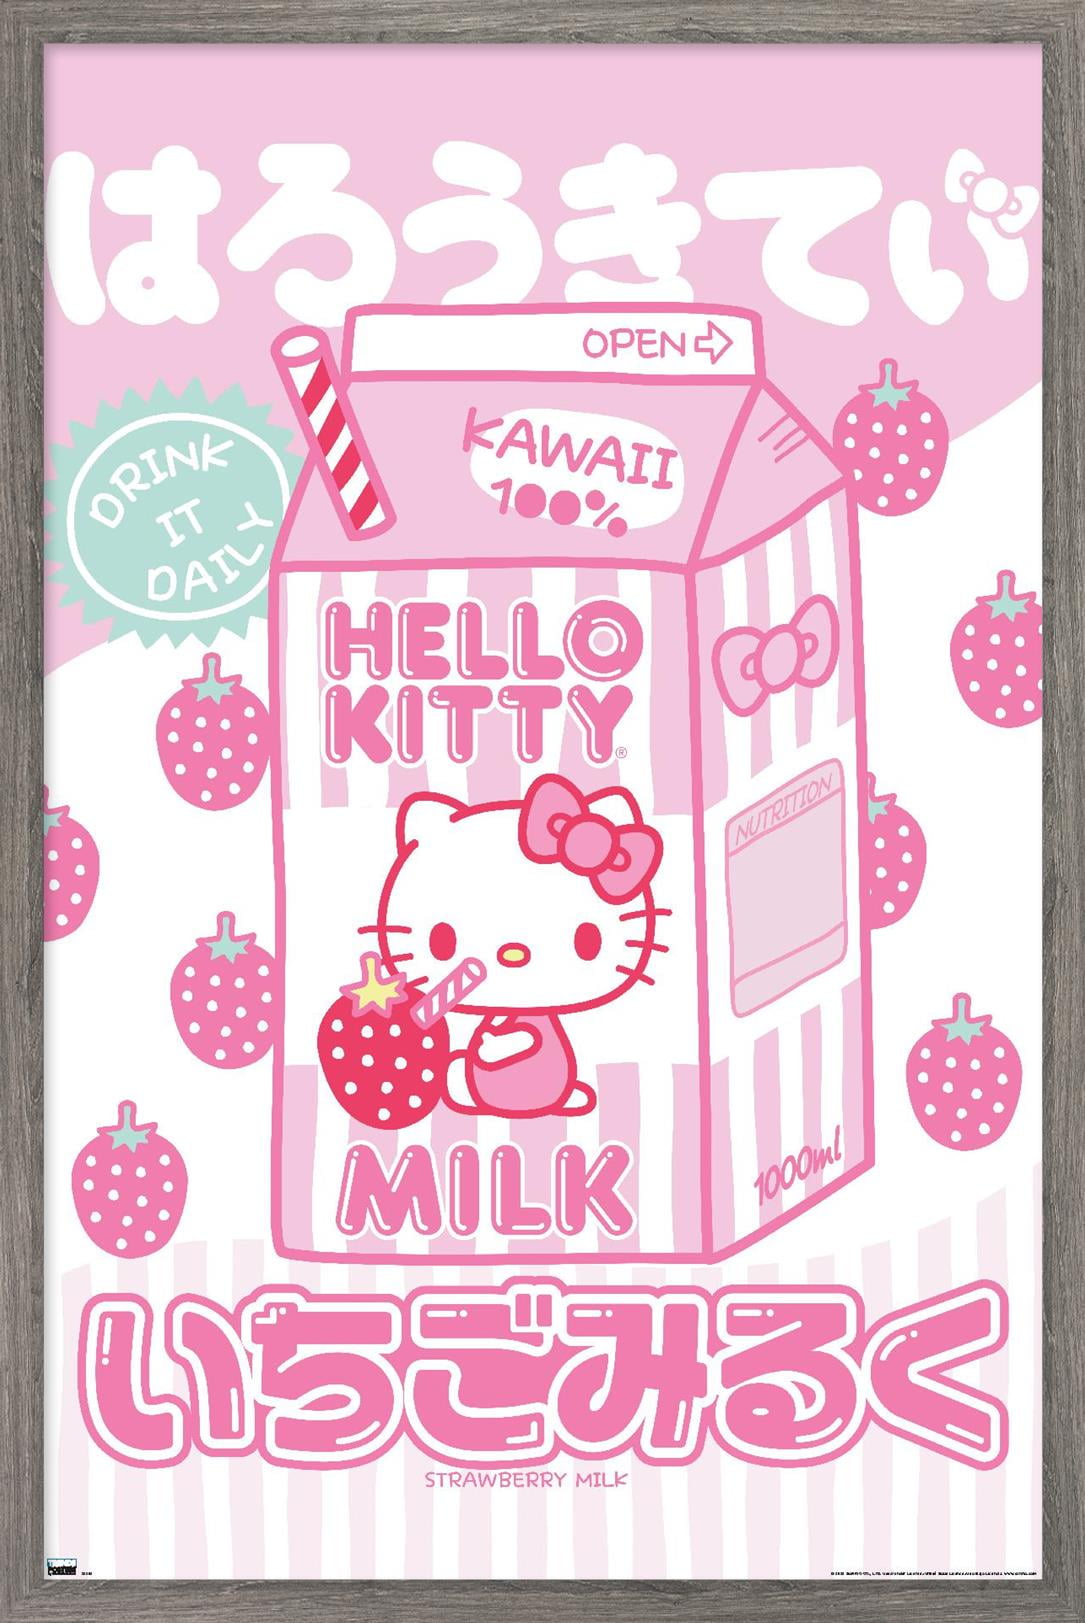 Good Morning With Hello Kitty 😊 Poster by May Pinky ✨ - Mobile